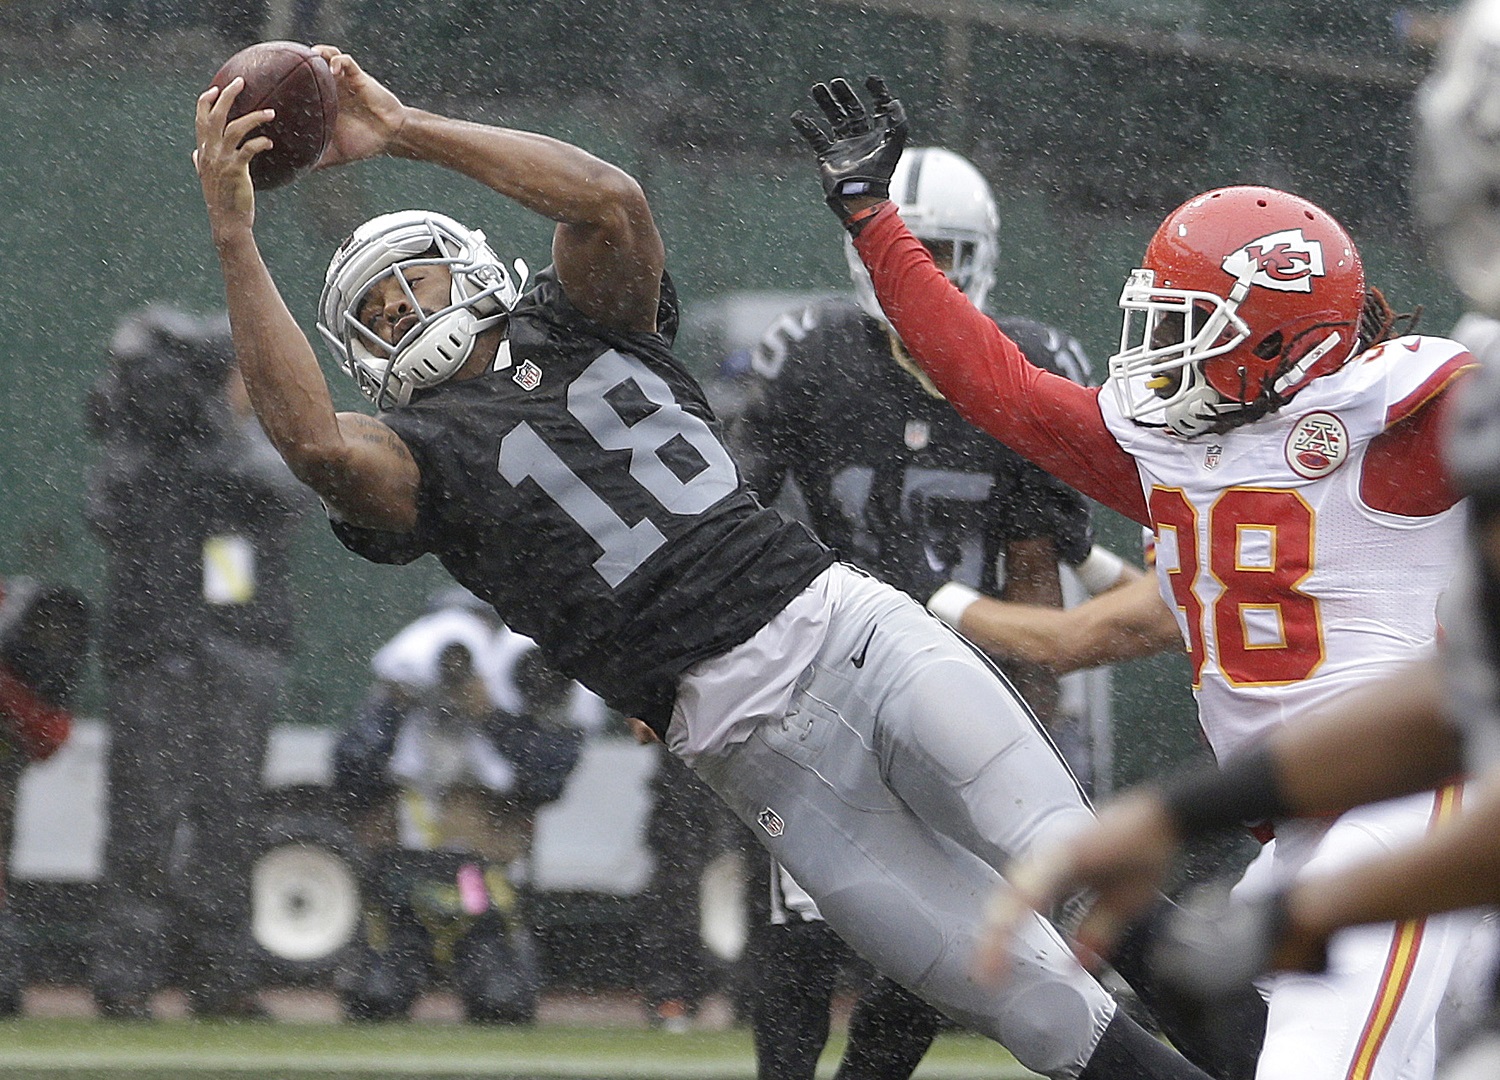 Oakland Raiders wide receiver Andre Holmes (18) catches a touchdown pass next to Kansas City Chiefs defensive back Ron Parker (38) during the first half of an NFL football game in Oakland, Calif., Sunday, Oct. 16, 2016. (AP Photo/Ben Margot)